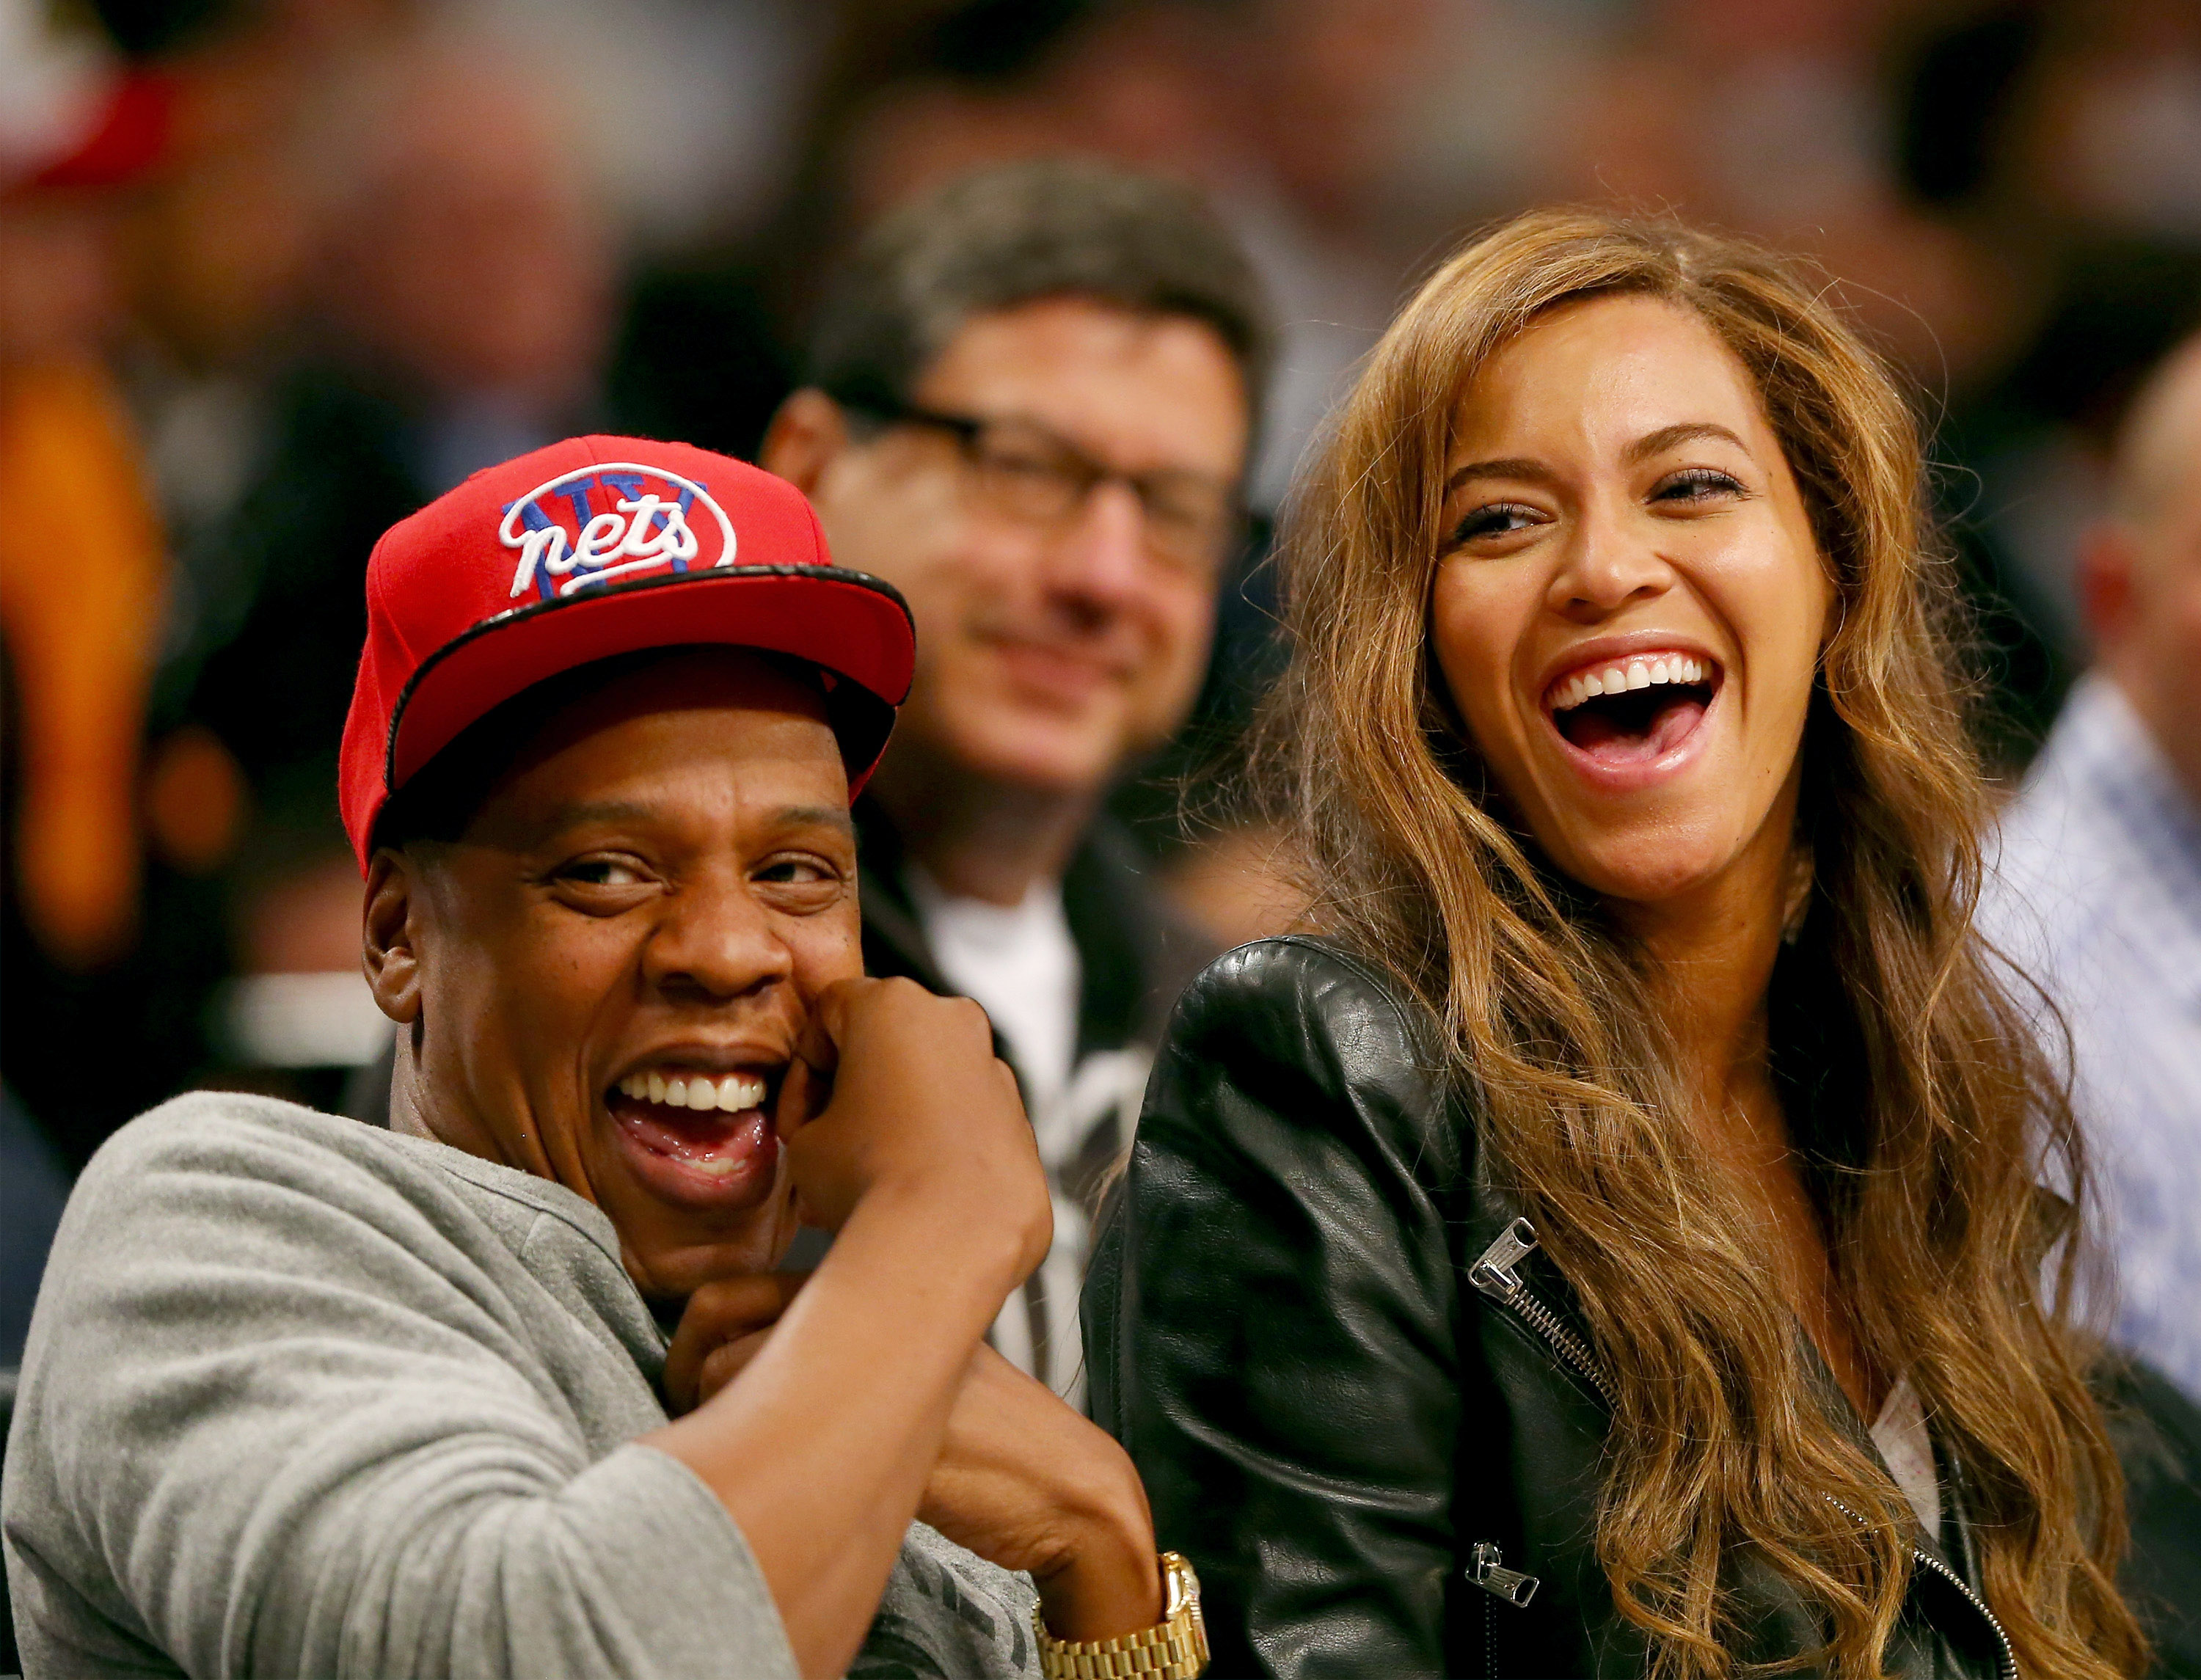 Beyonce And Jay Z Are The World’s Highest-Paid Celebrity Couple Of 2016 